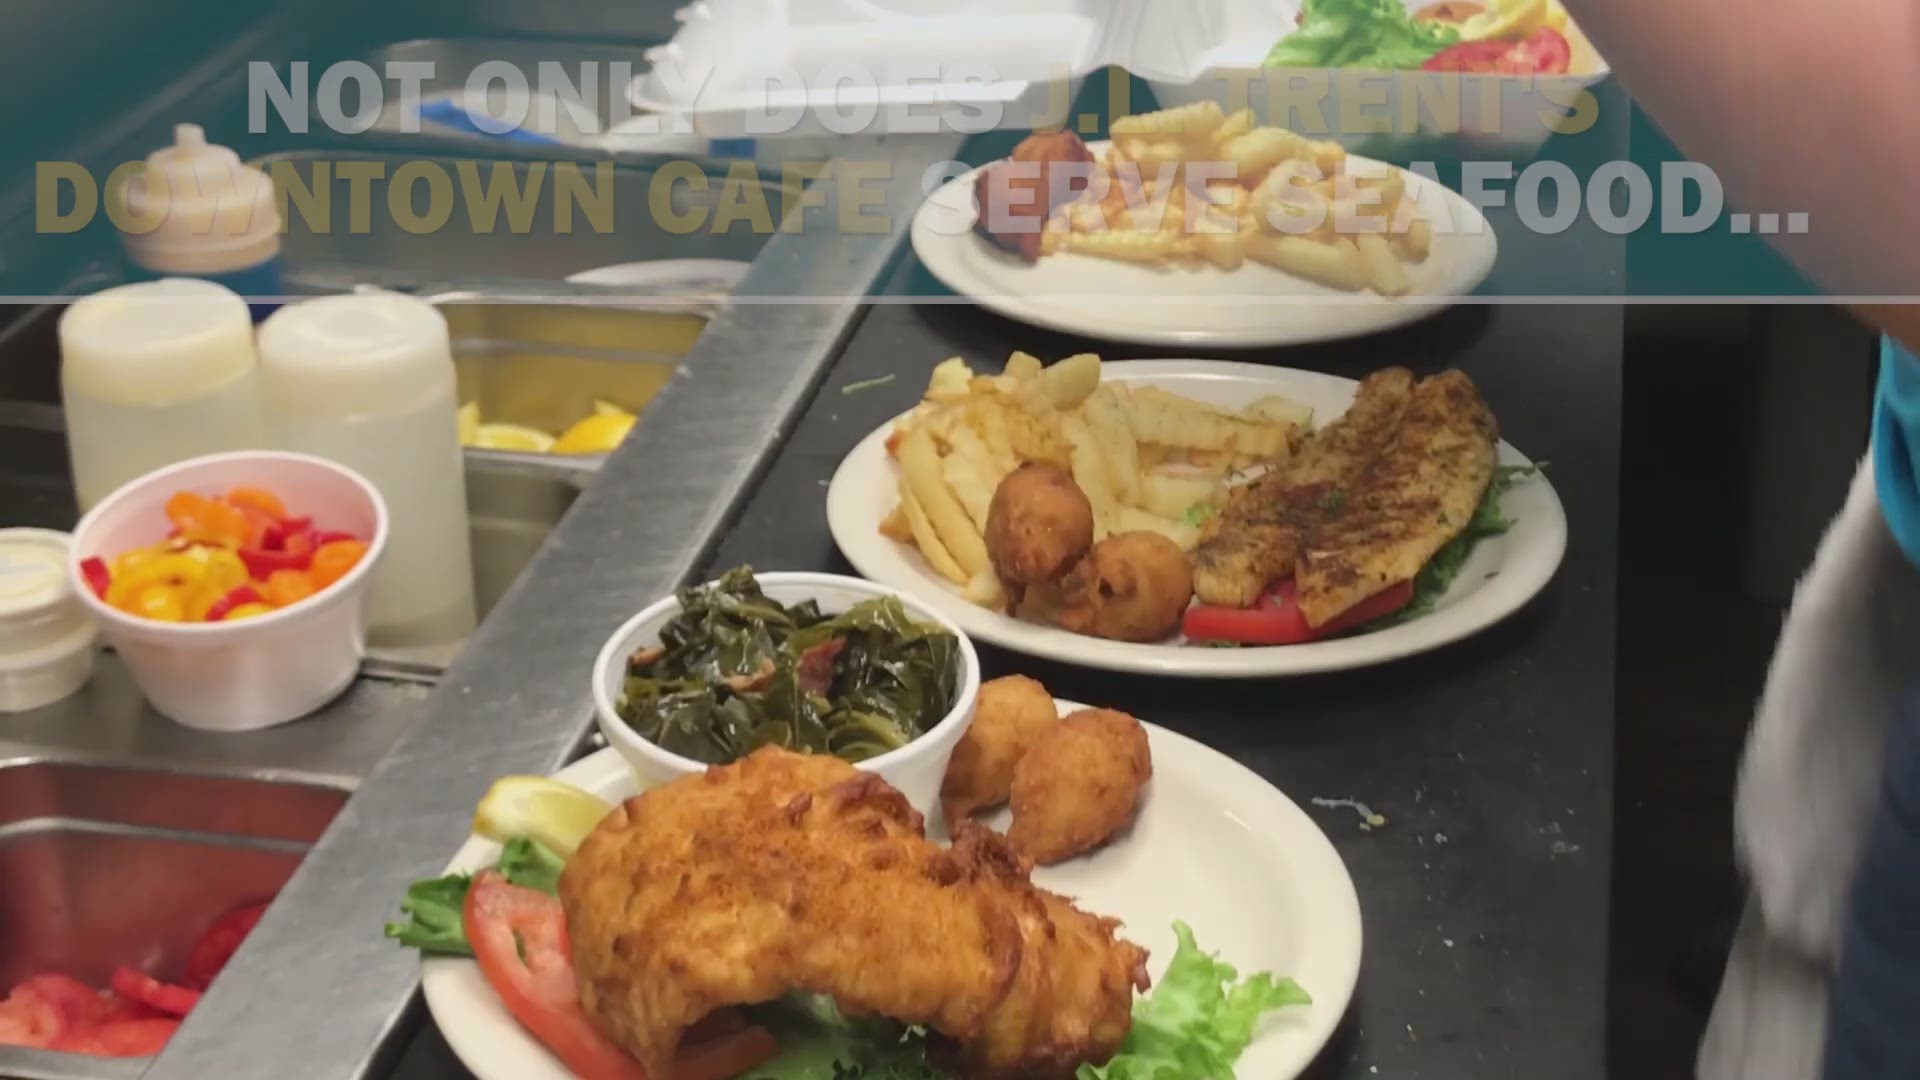 The restaurant is a spinoff of the popular J.L. Trent's Seafood and Grill off of Roosevelt Boulevard near NAS Jacksonville. Though it specializes in seafood dishes, it also serves a wide-variety of popular lunch-menu items like burgers, sandwiches and chi